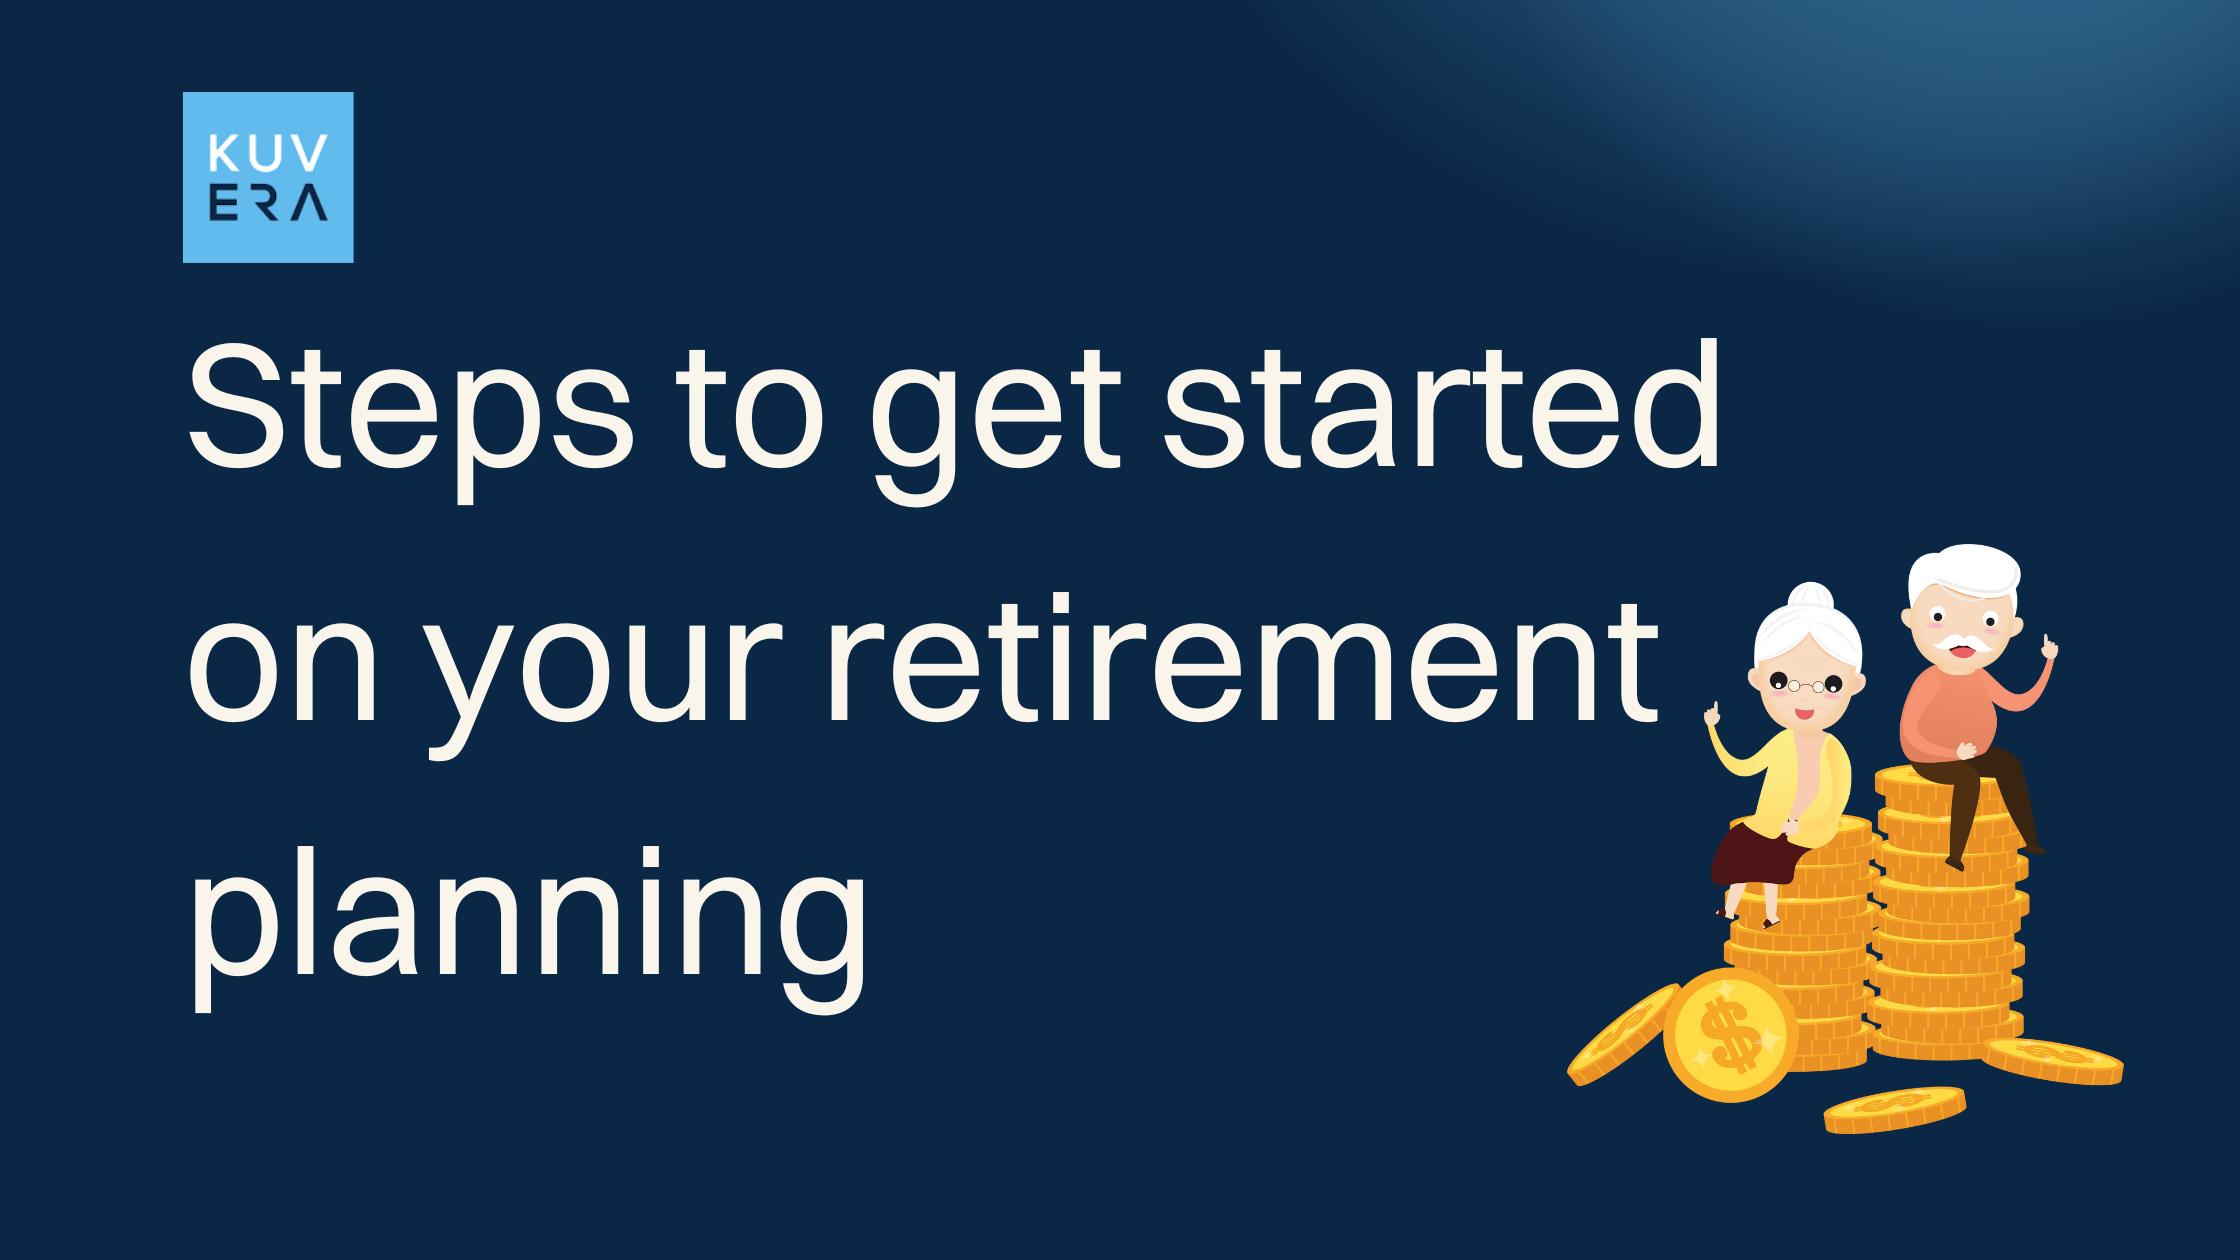 Steps to get started on your retirement planning | Kuvera